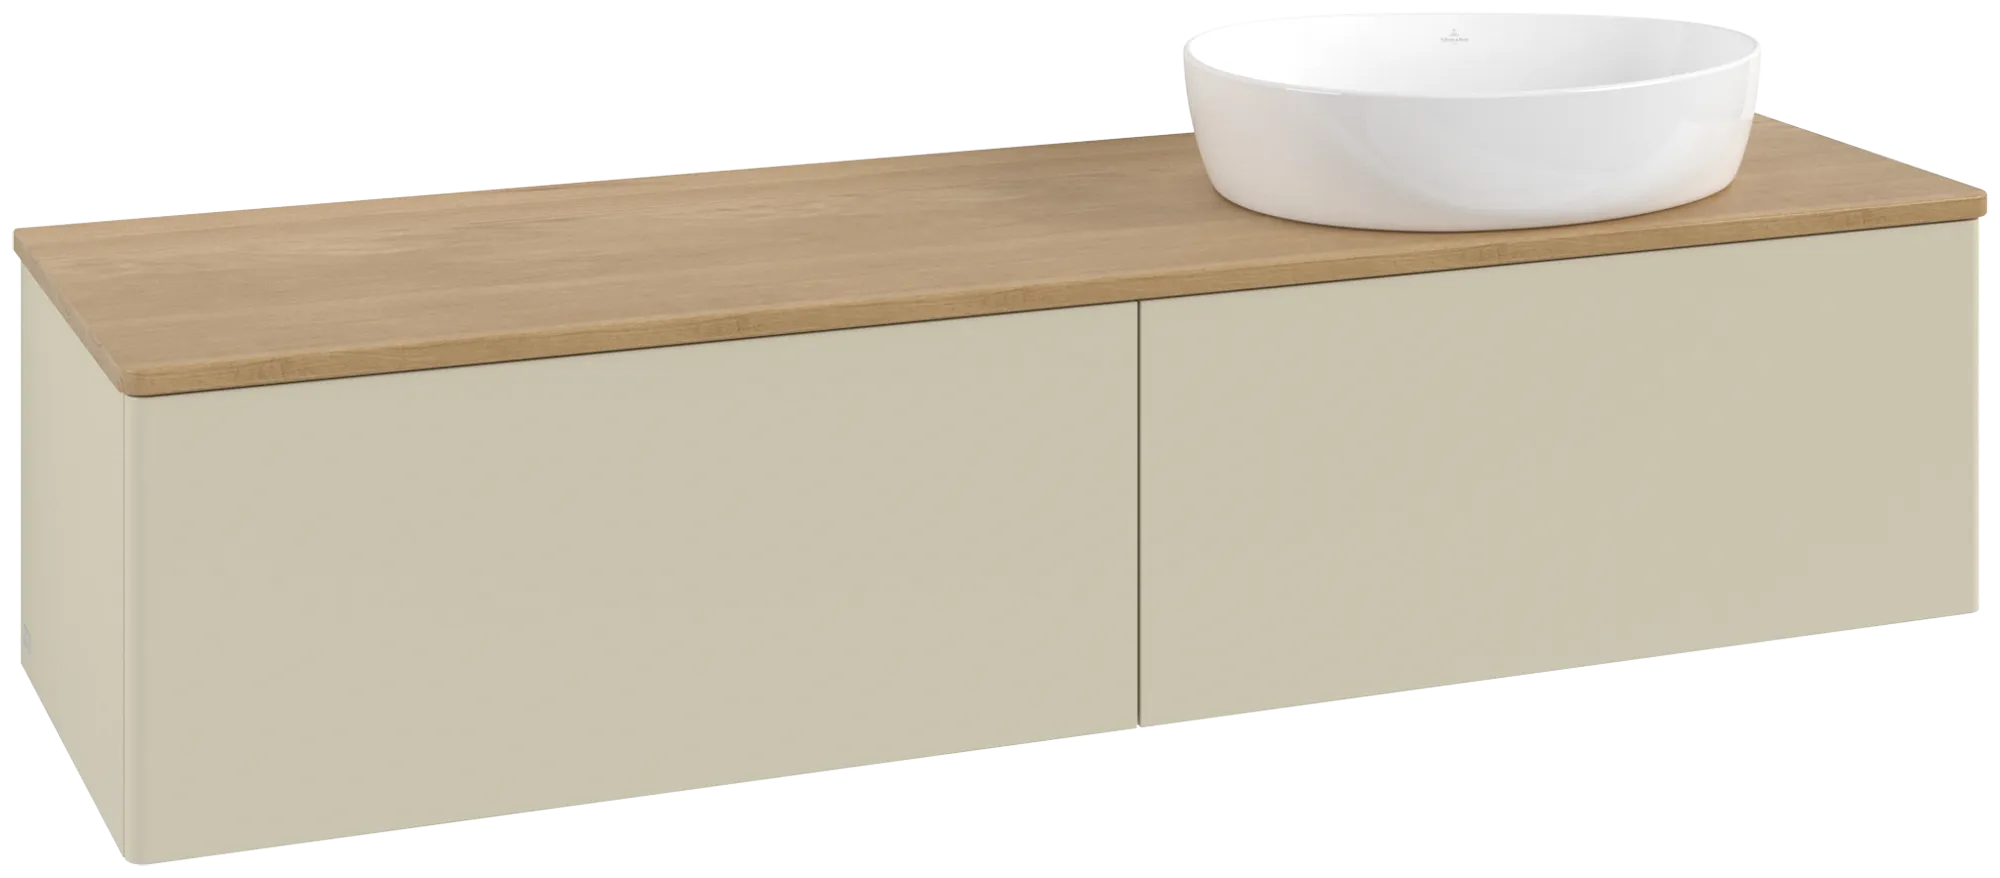 VILLEROY BOCH Antao Vanity unit, with lighting, 2 pull-out compartments, 1600 x 360 x 500 mm, Front without structure, Silk Grey Matt Lacquer / Honey Oak #L38011HJ resmi